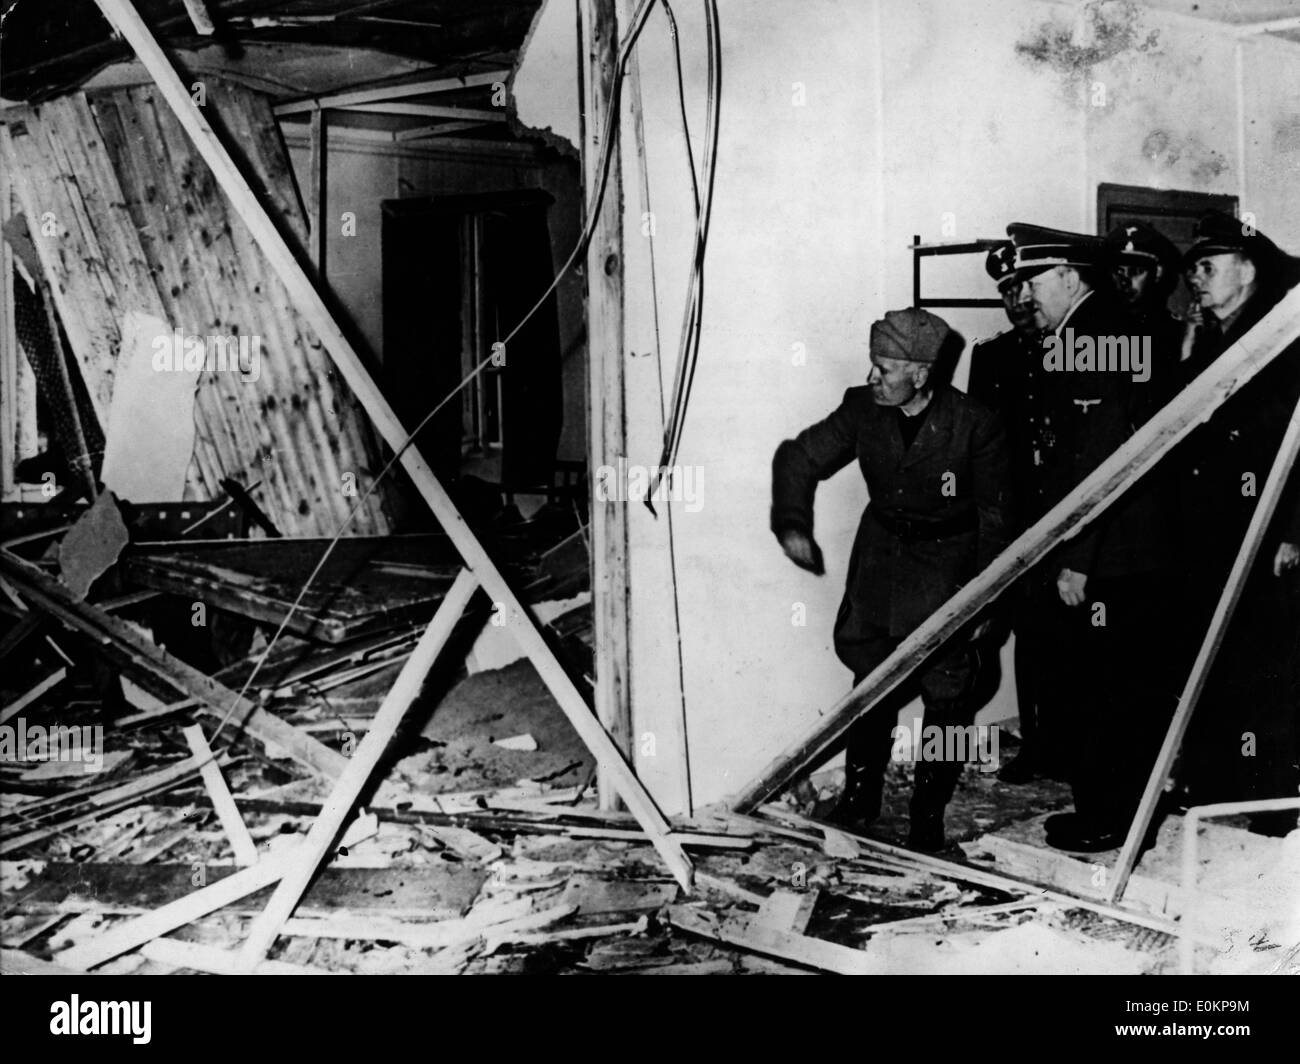 Damage caused by bomb Stock Photo